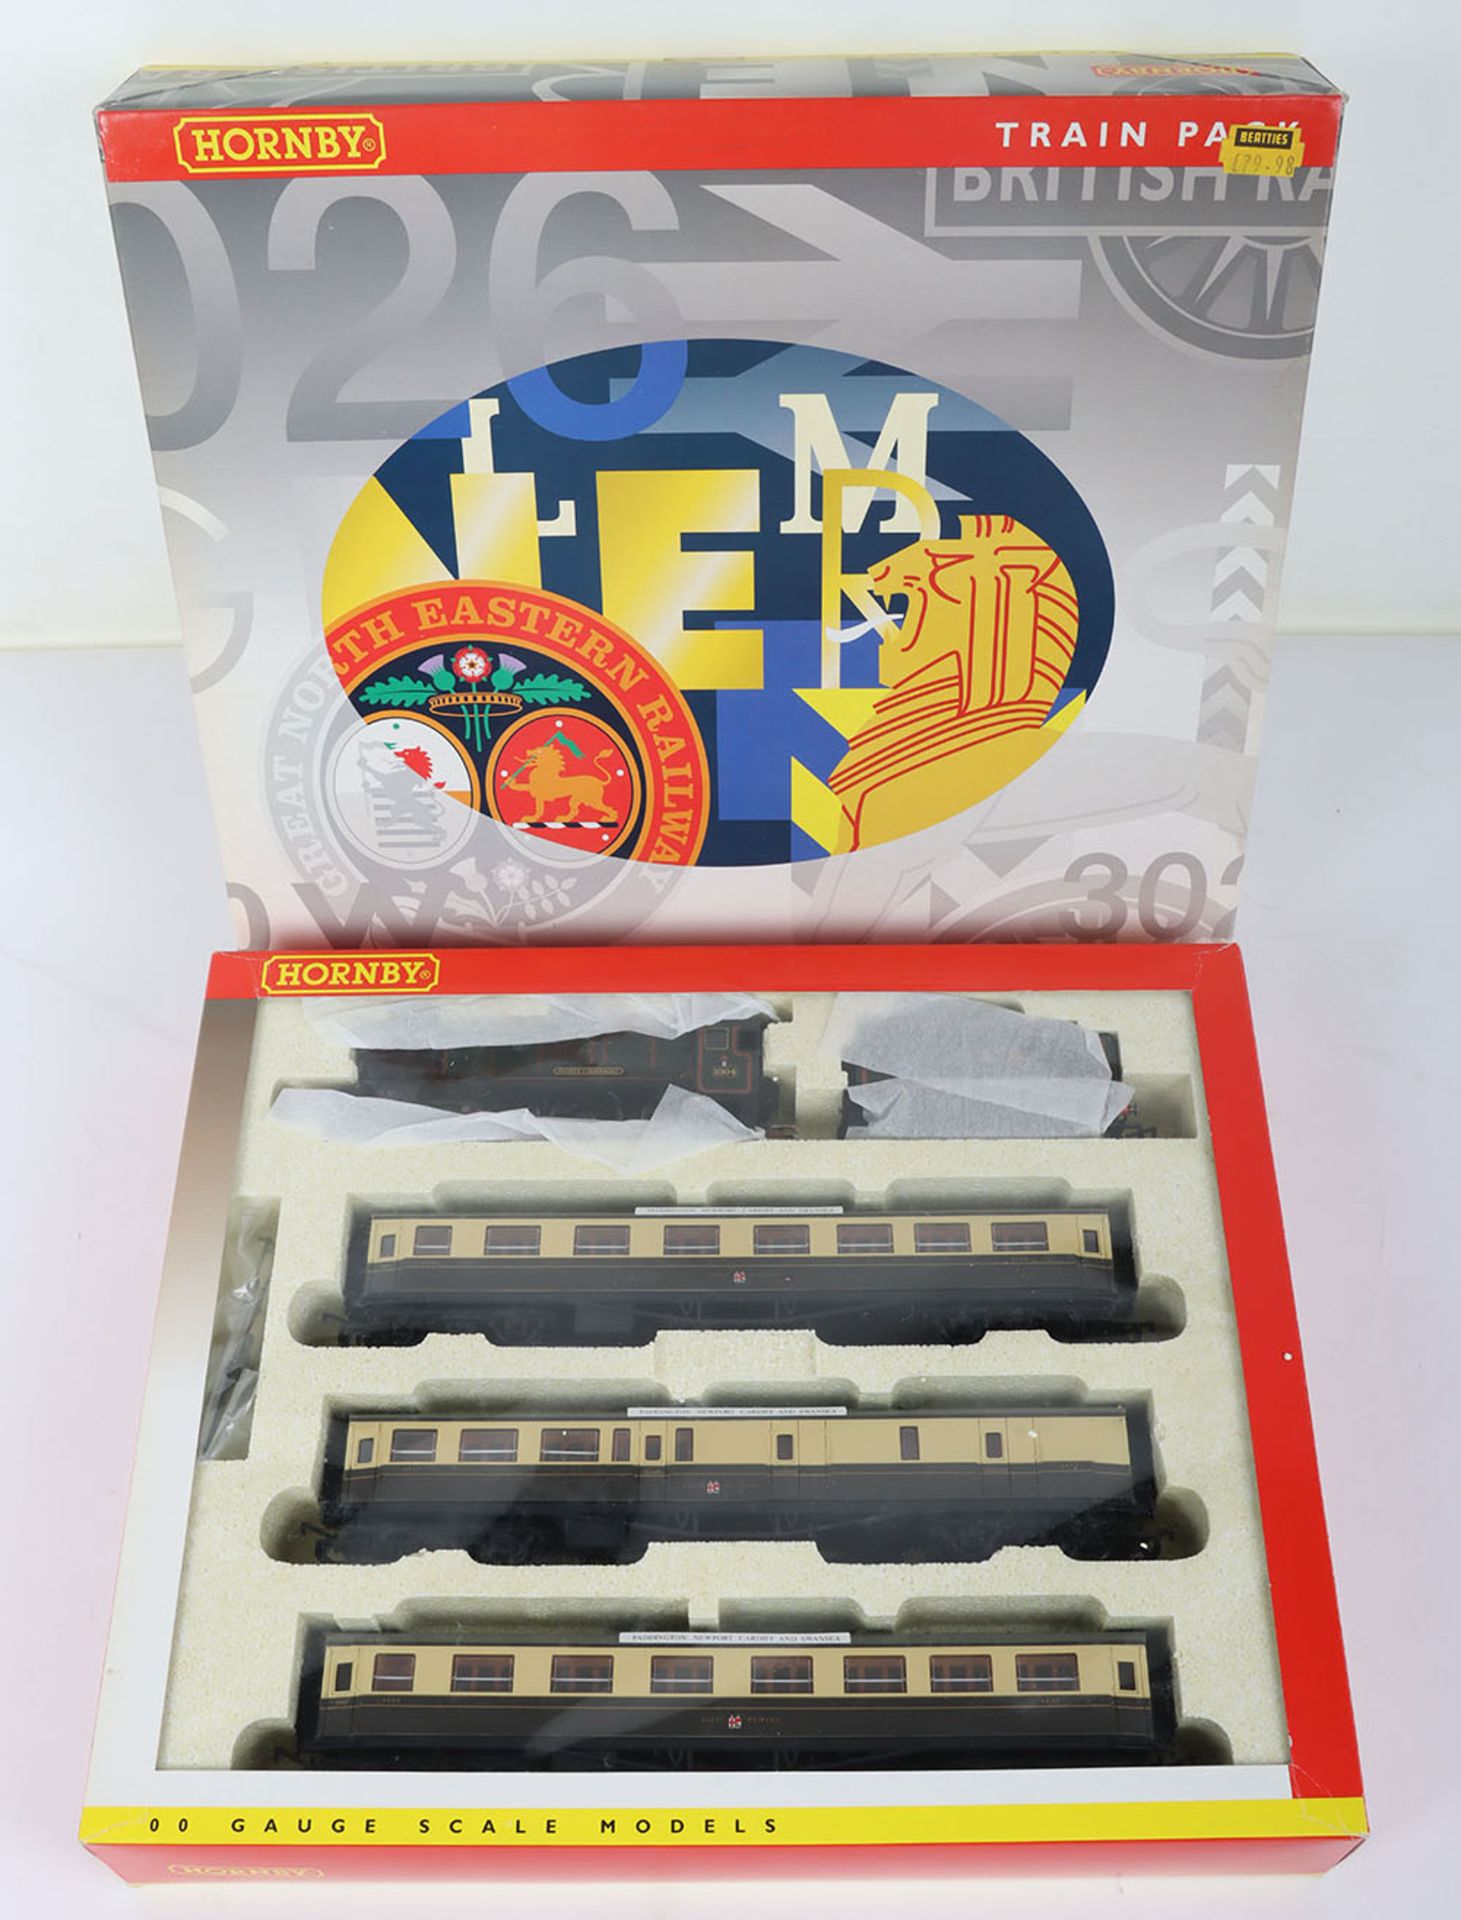 Hornby R2025 Great Western Express Passenger Train set - Image 2 of 3